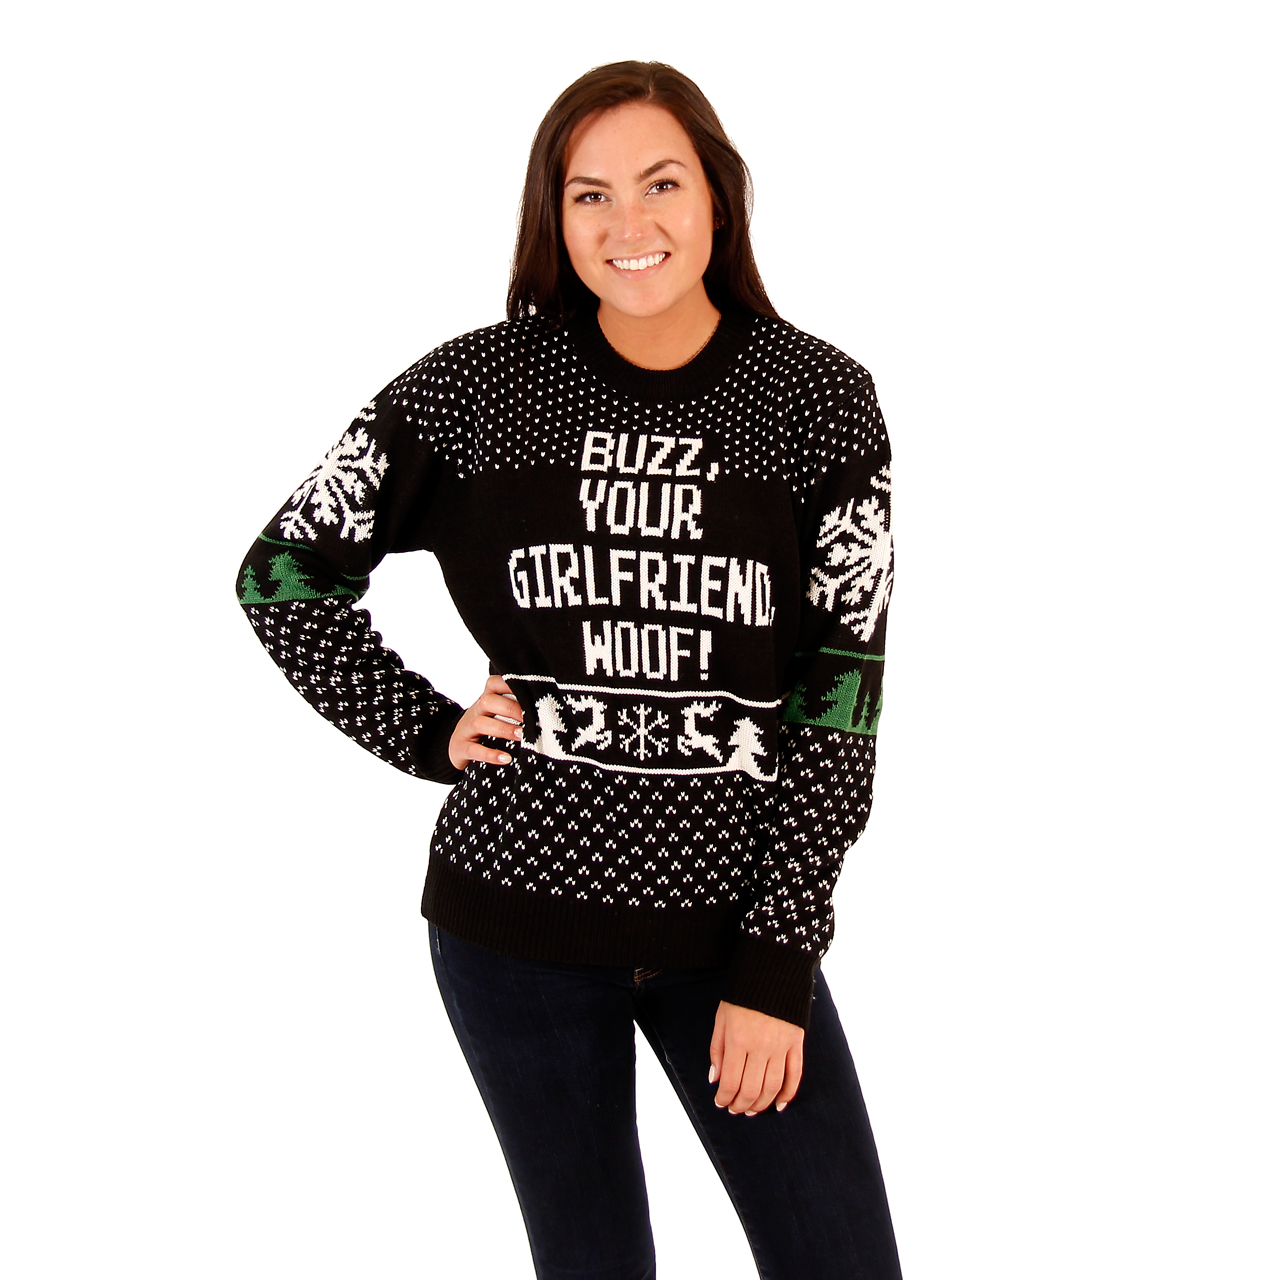 Women’s Buzz, Your Girlfriend, Woof! Sweater,New Products : uglyschristmassweater.com